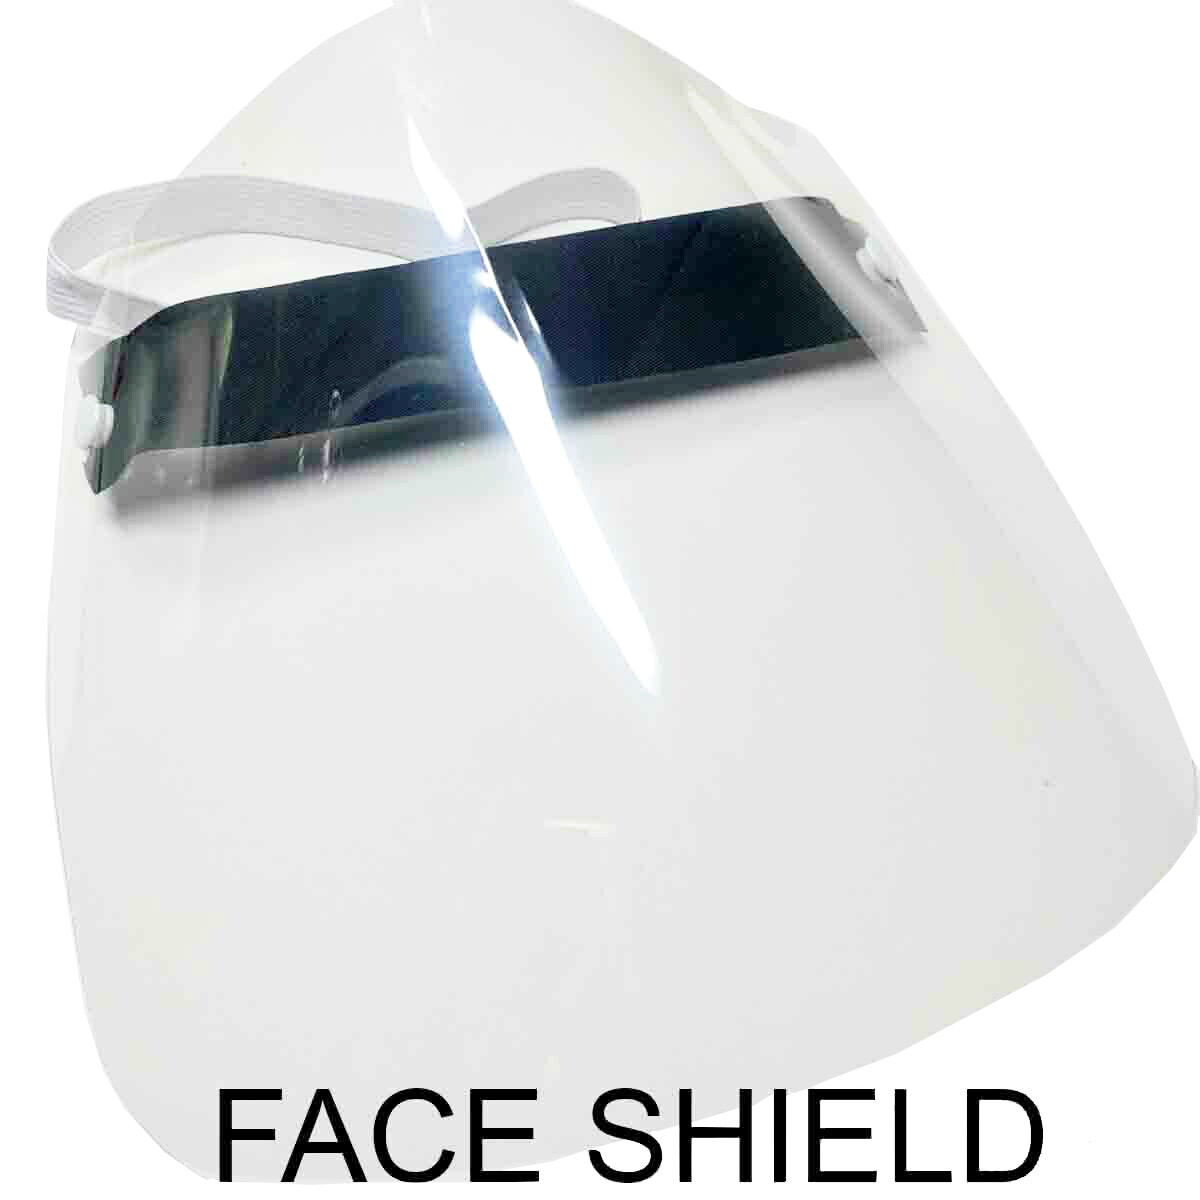 REUSABLE FACE SHIELD (REMOVE THE FILM OFF BOTH SIDES OF THE SHIELD)